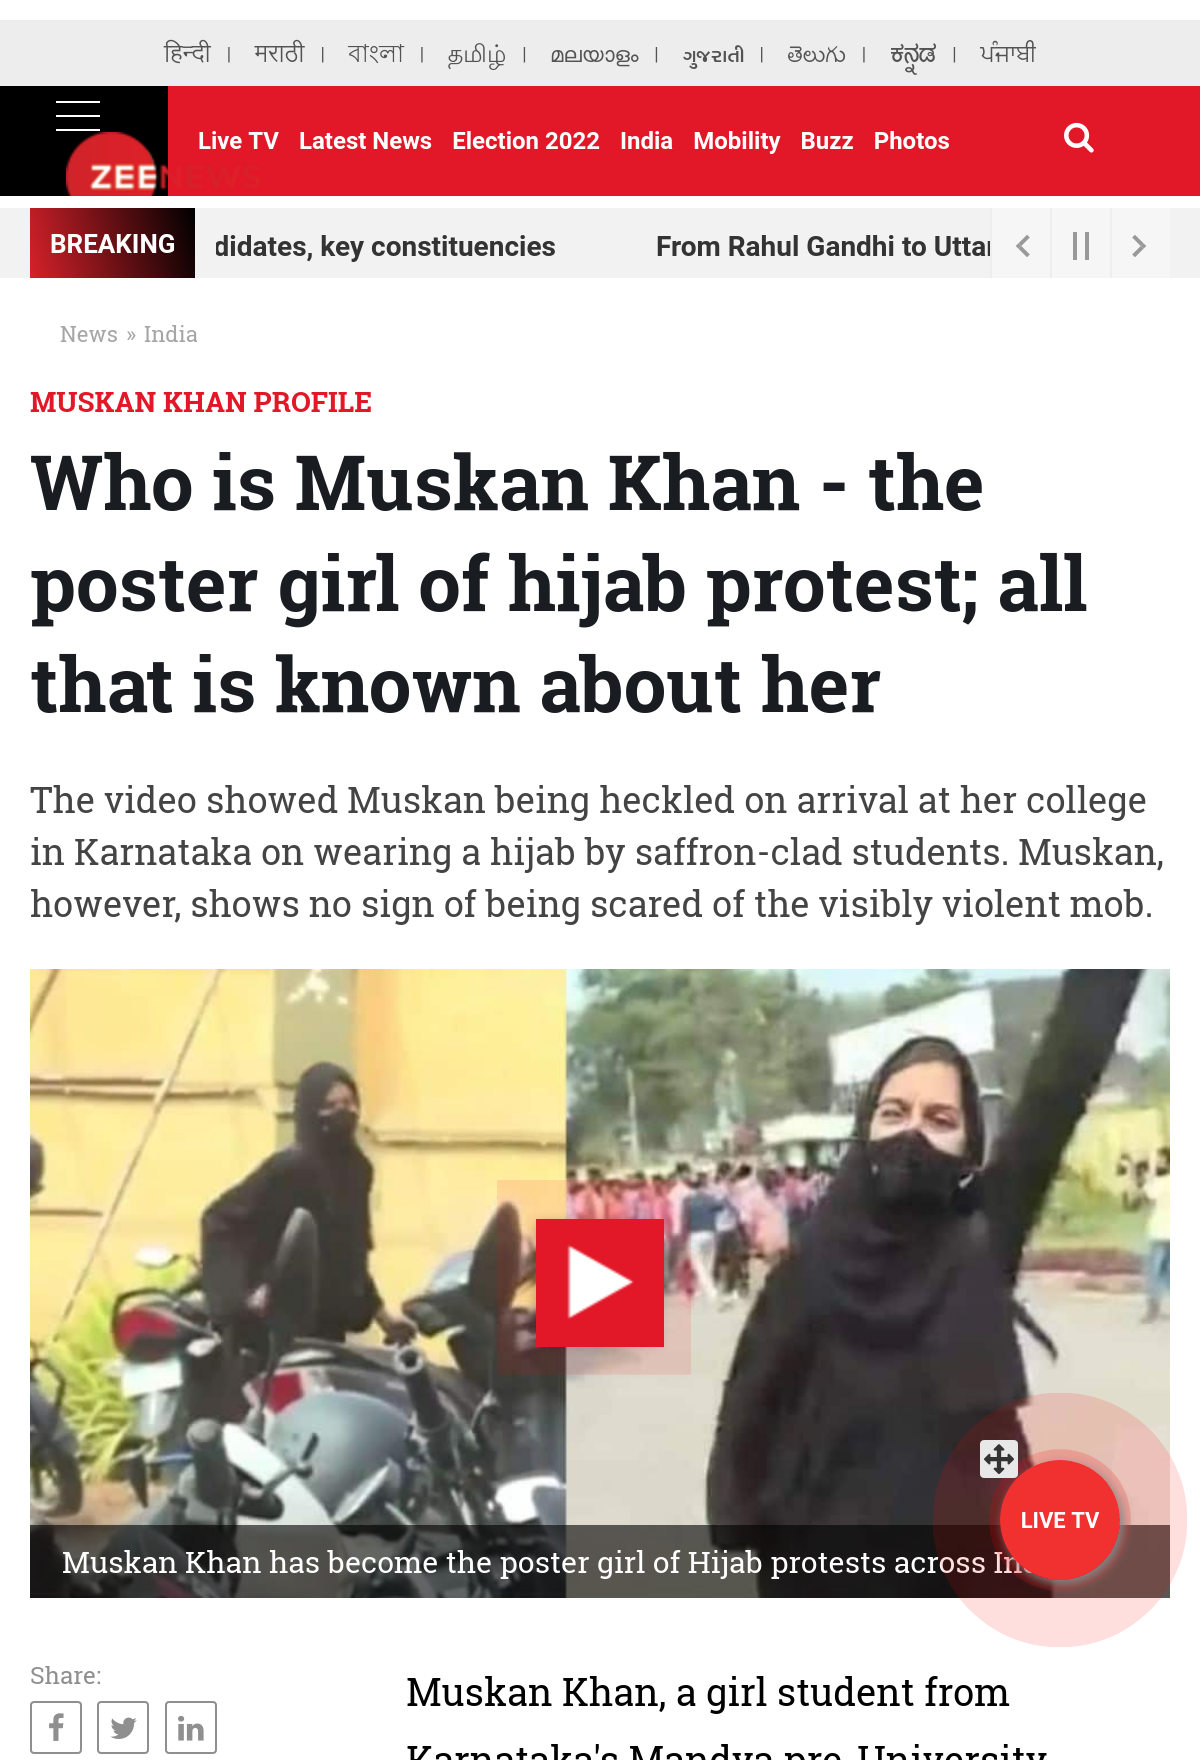 Zee News - All that is known about Muskan Khan